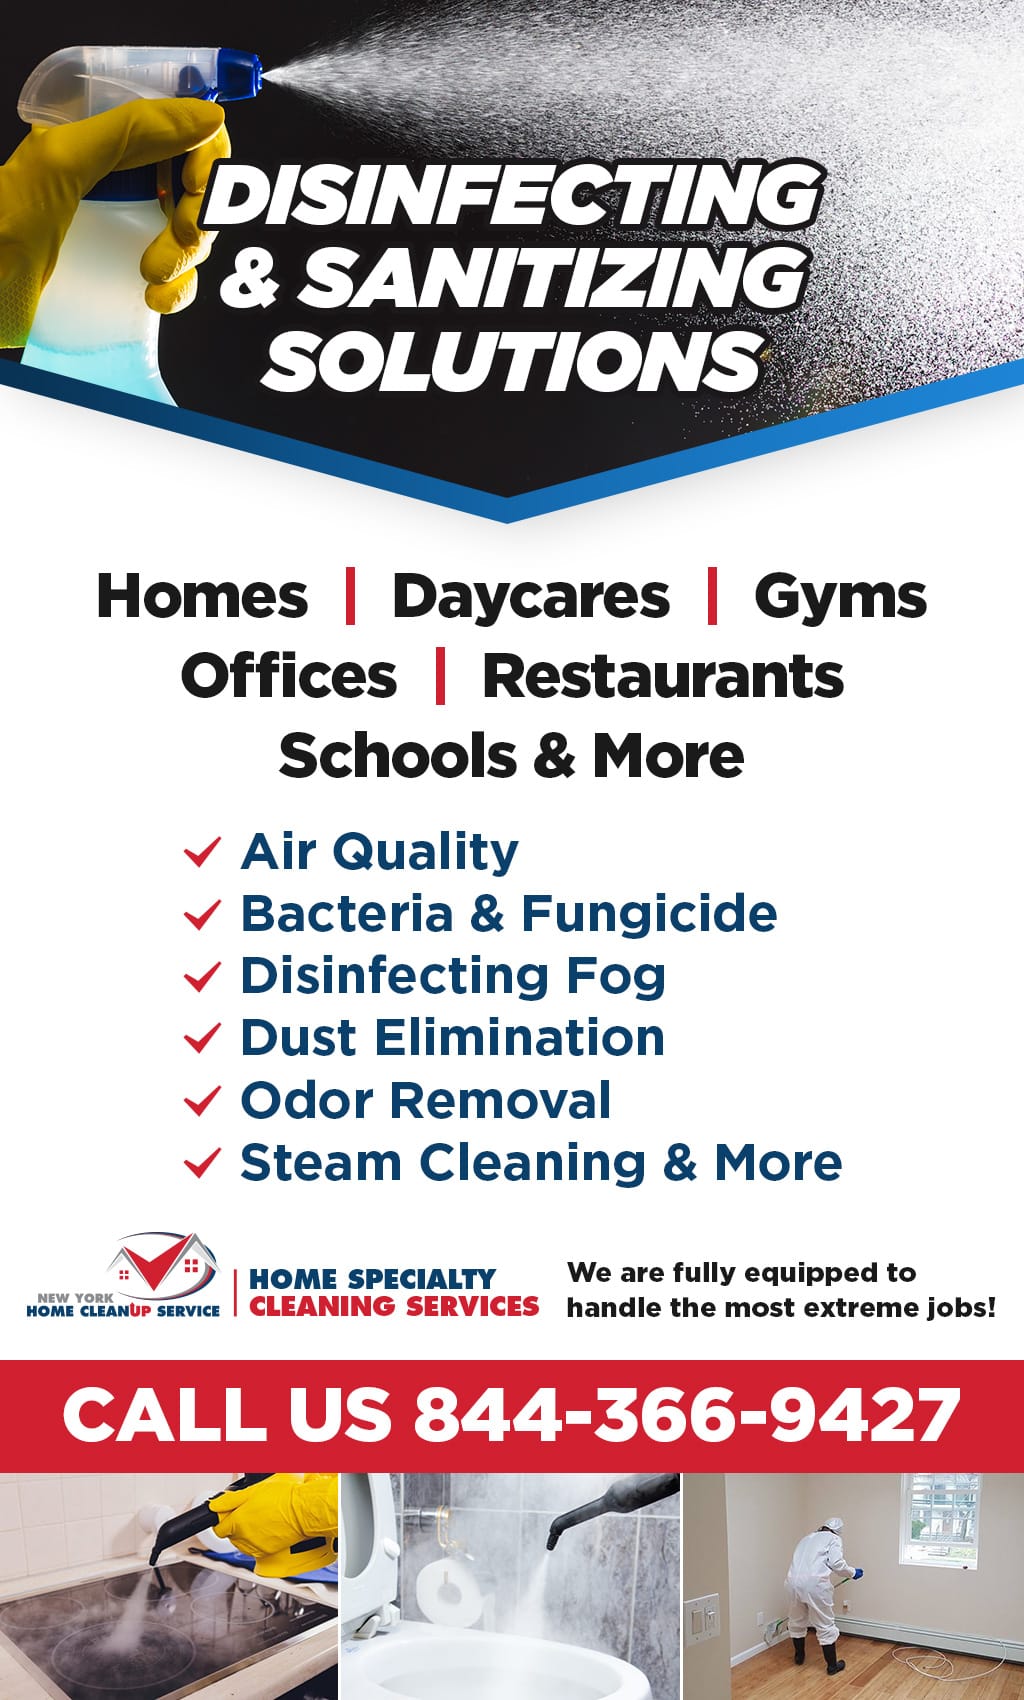 New York, NY. and Tri-State Area Deep Cleaning and Disinfecting and Sanitizing Service